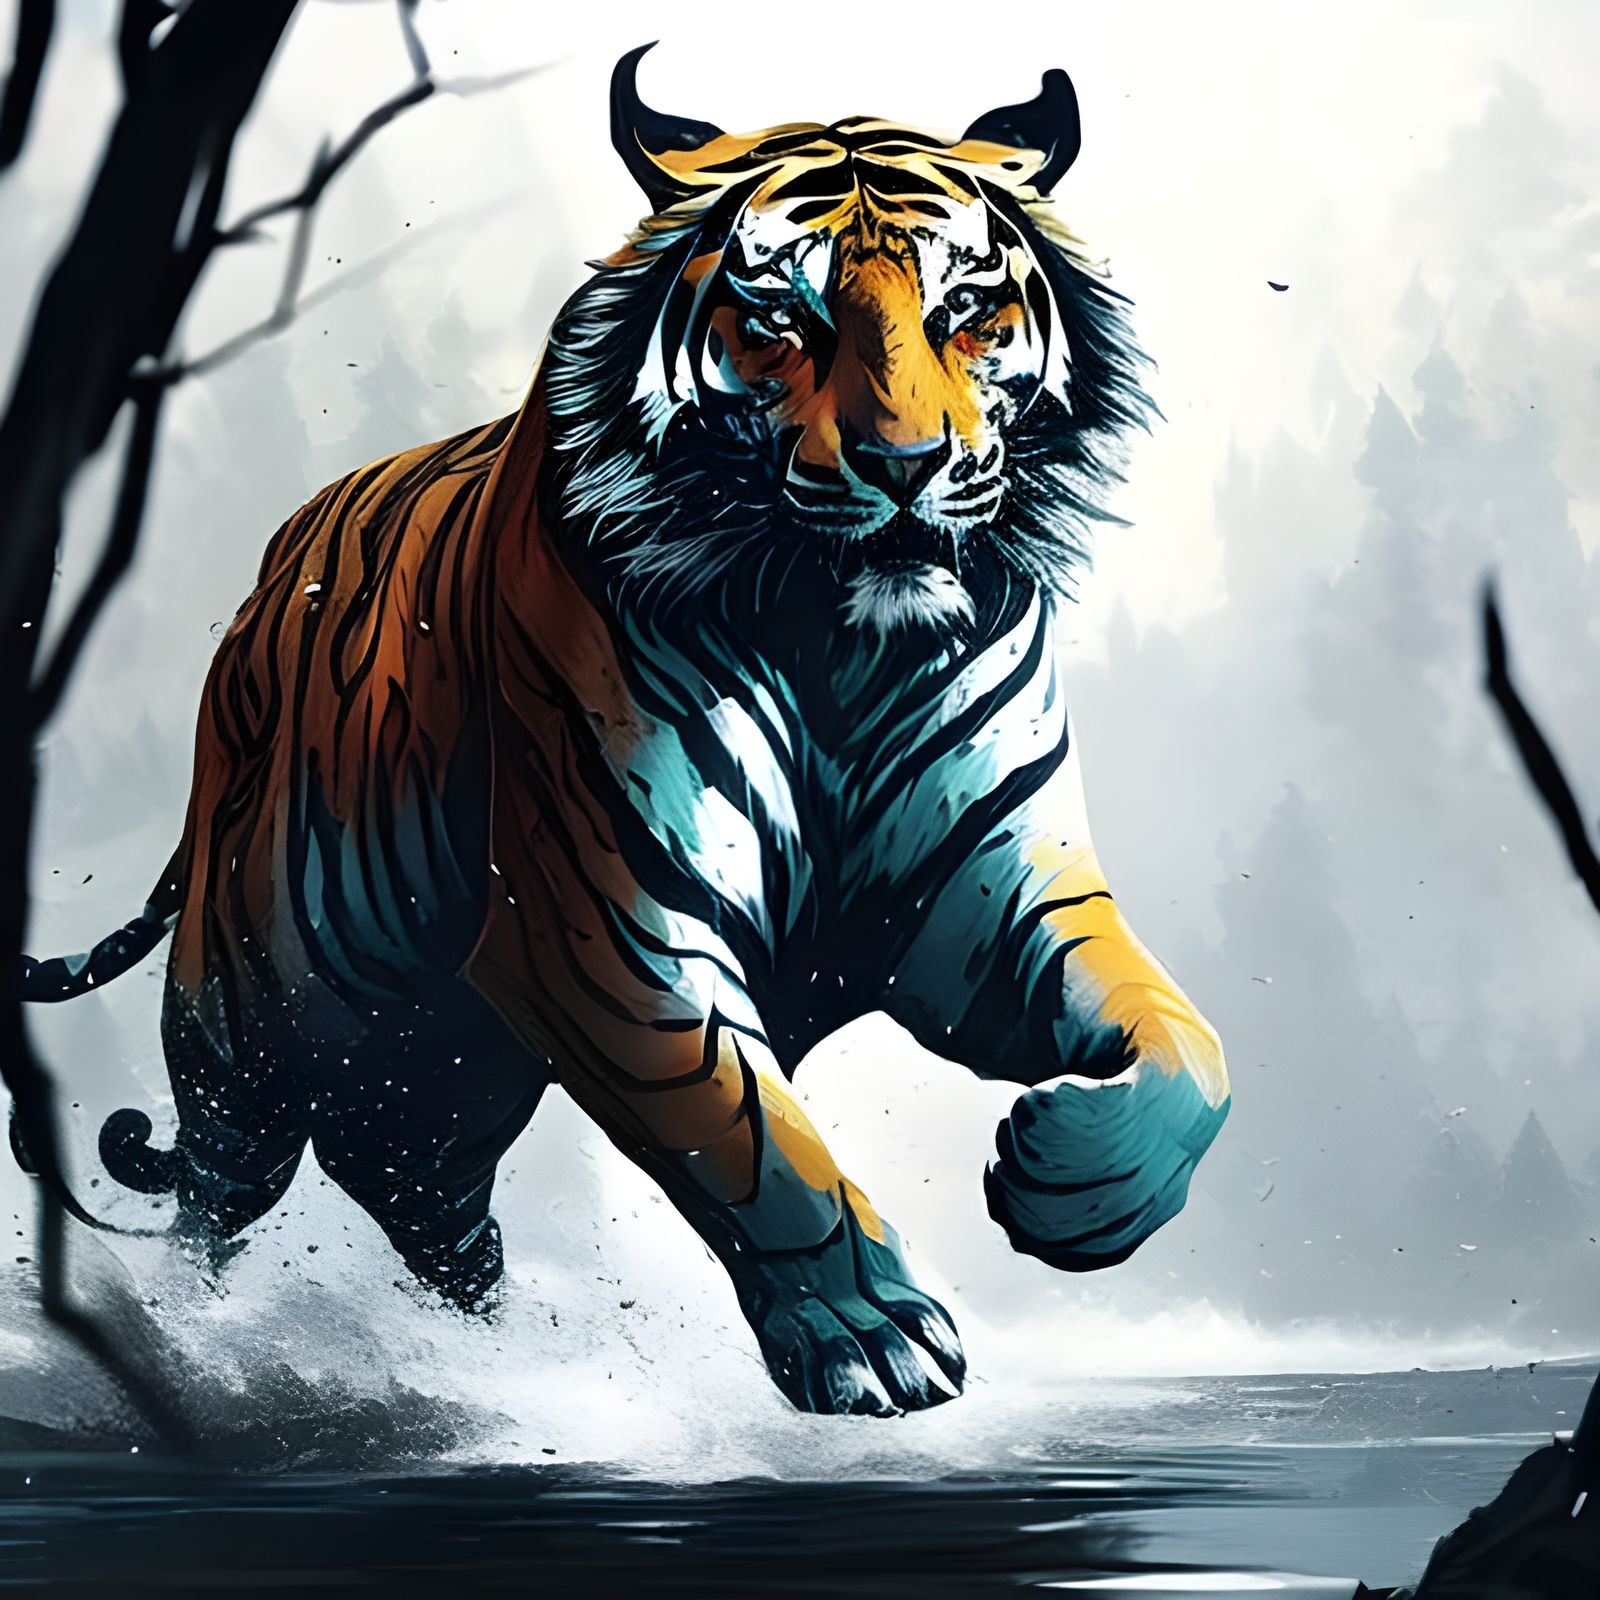 There is no place to hide, when the Demon Tiger is here to chase you.